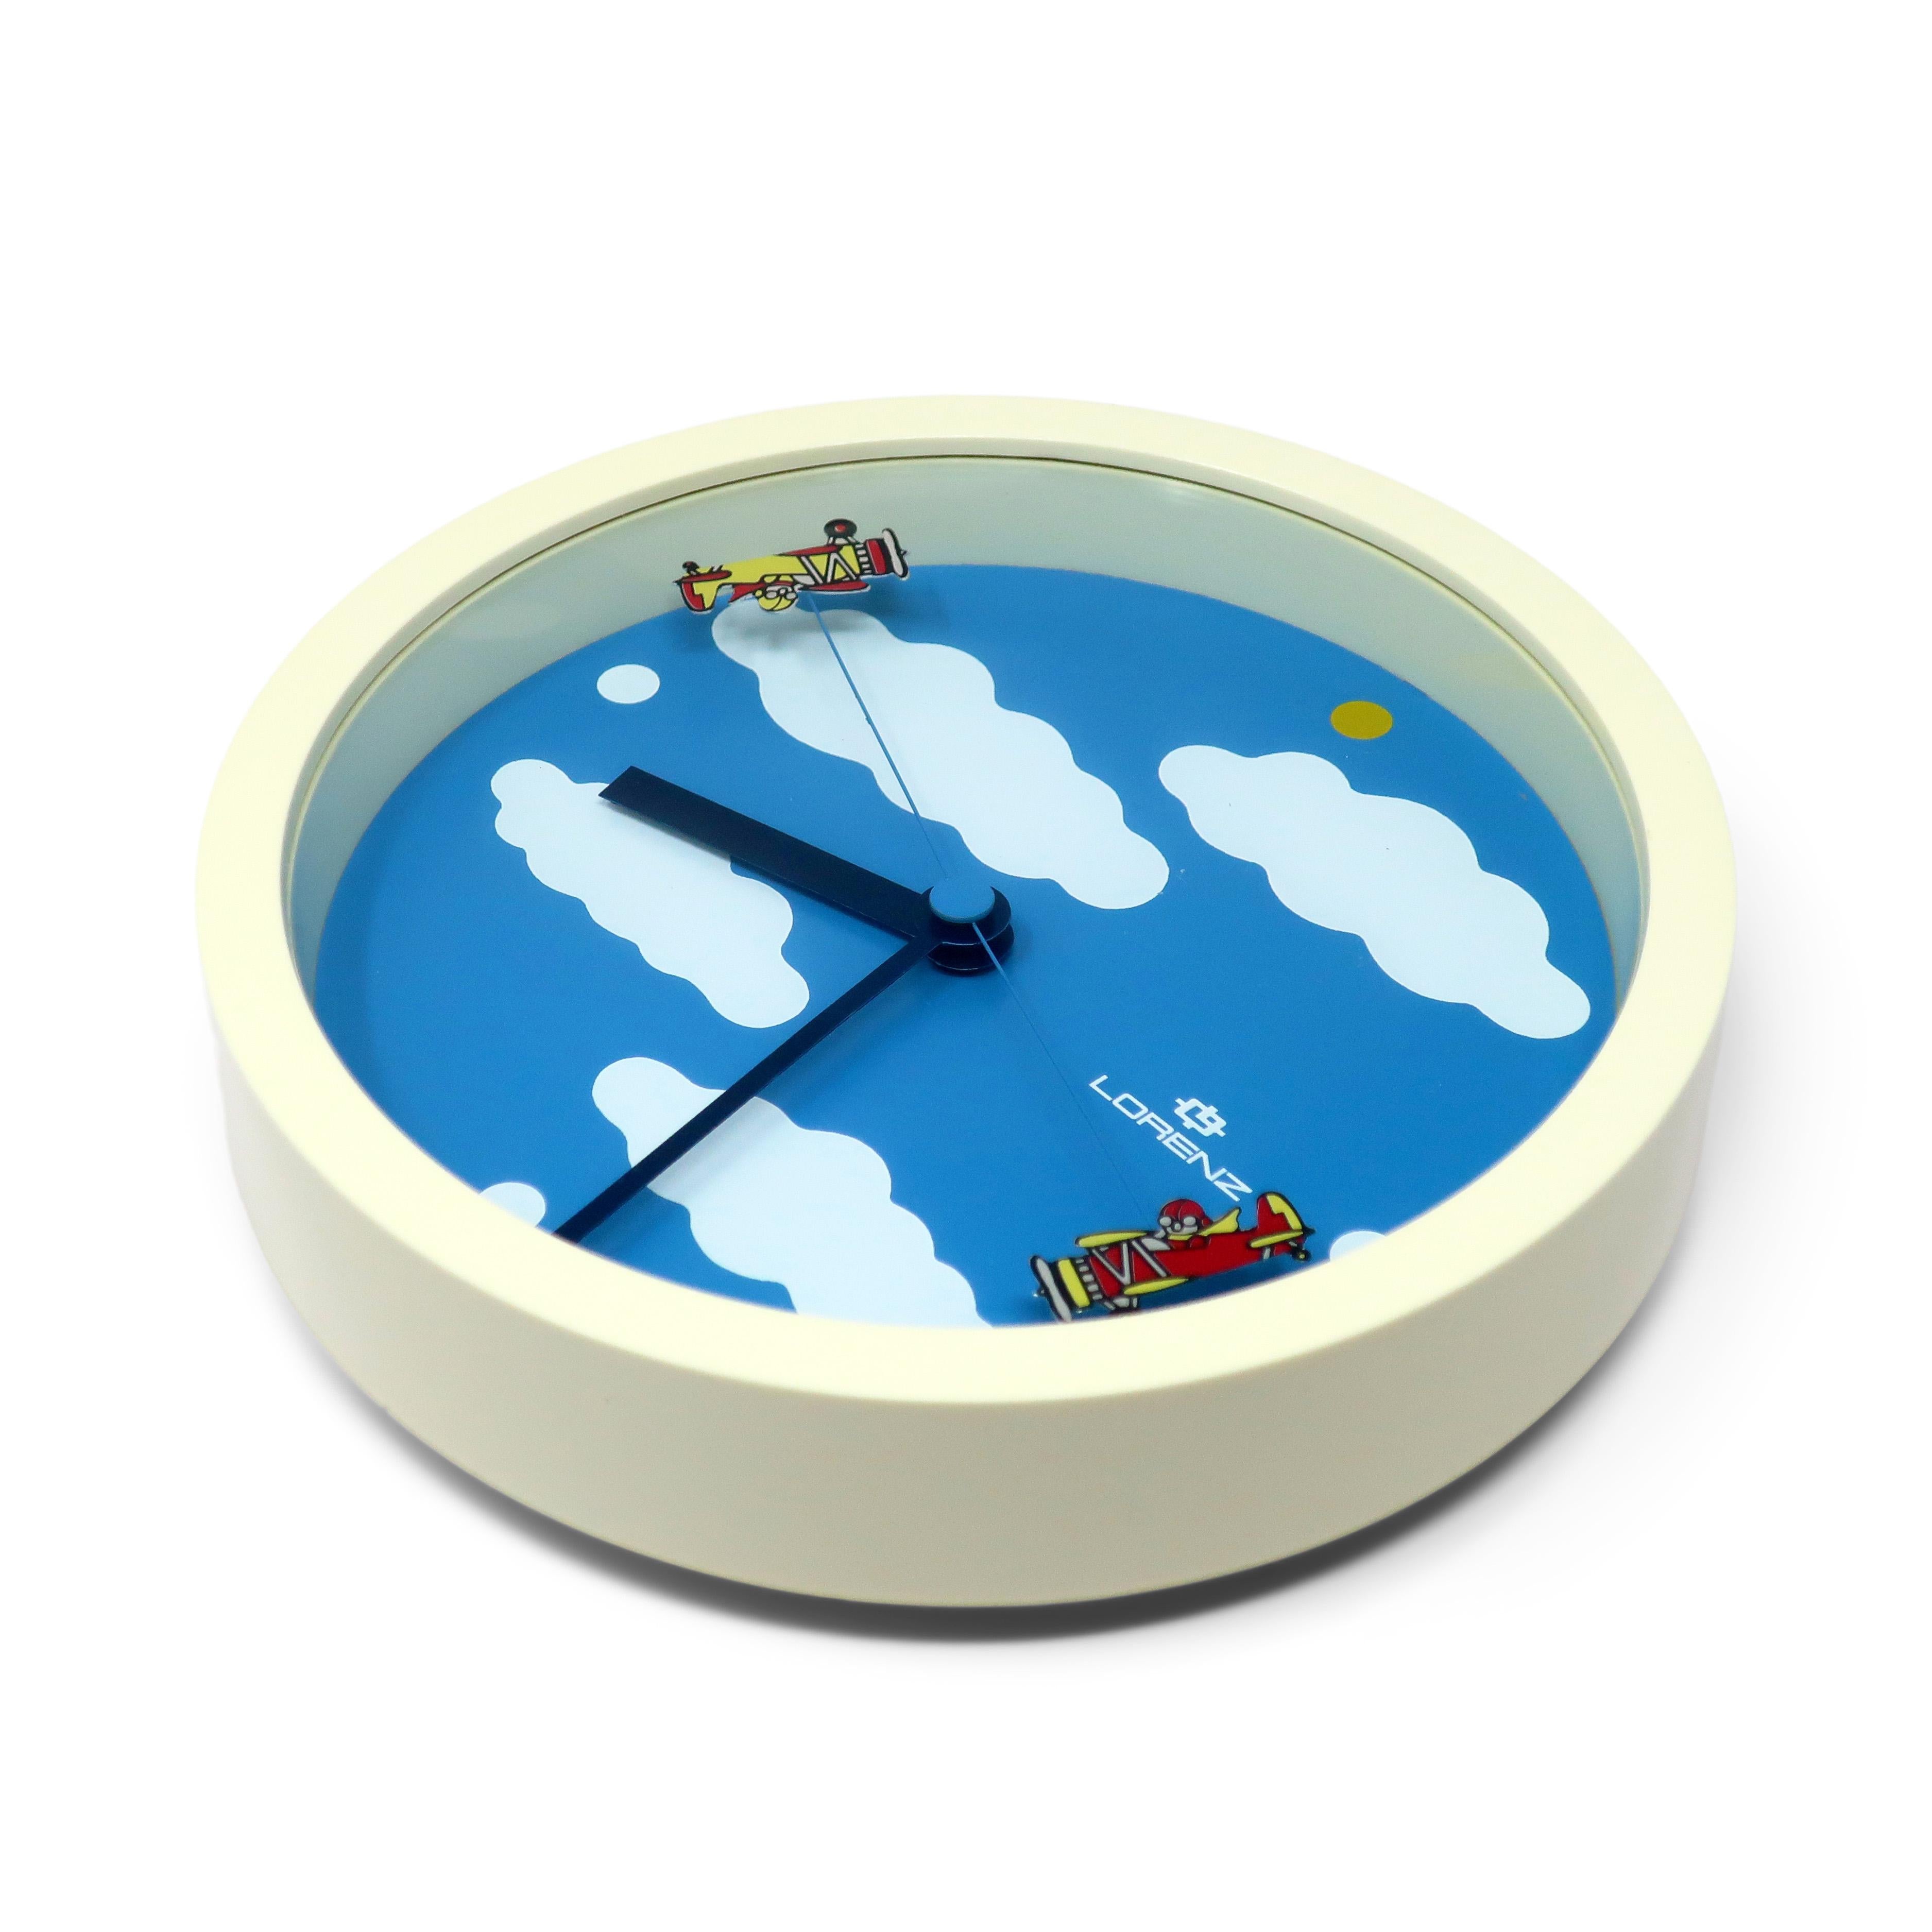 A round 1980s wall clock by Lorenz with white case, blue face with white clouds, black hour and minute hands, and second hand with two bi-planes on either end of the hand.  The clock has white dots for the 3, 6, and 9, as well as a yellow dot at 12,